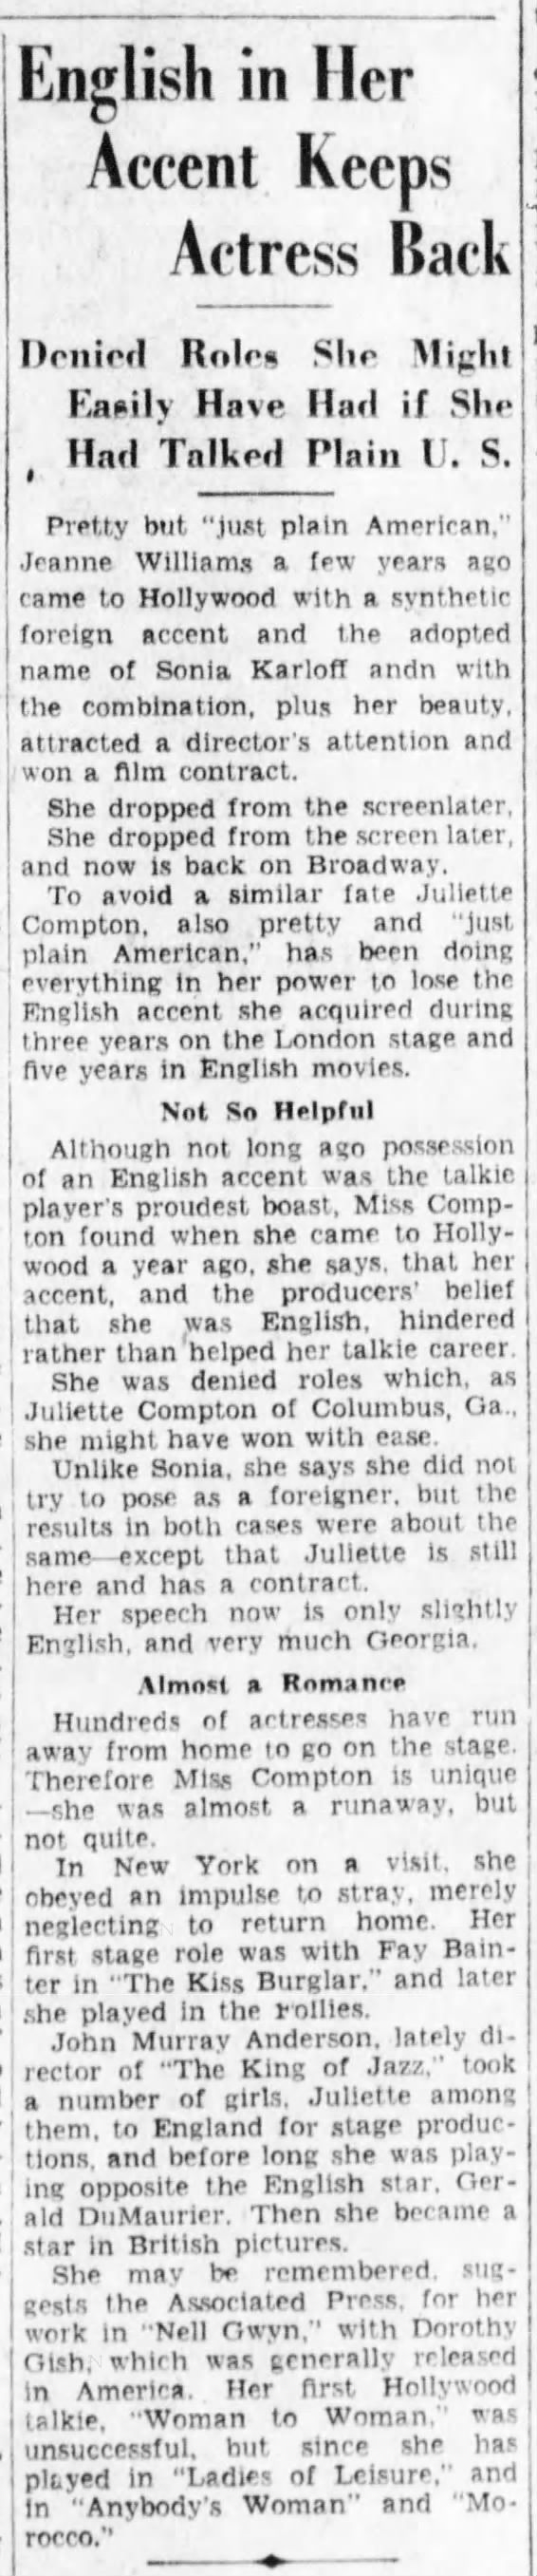 COMPTON Betty (originally from GA) English accent is problem
Daily Eagle  7 Sept 1930